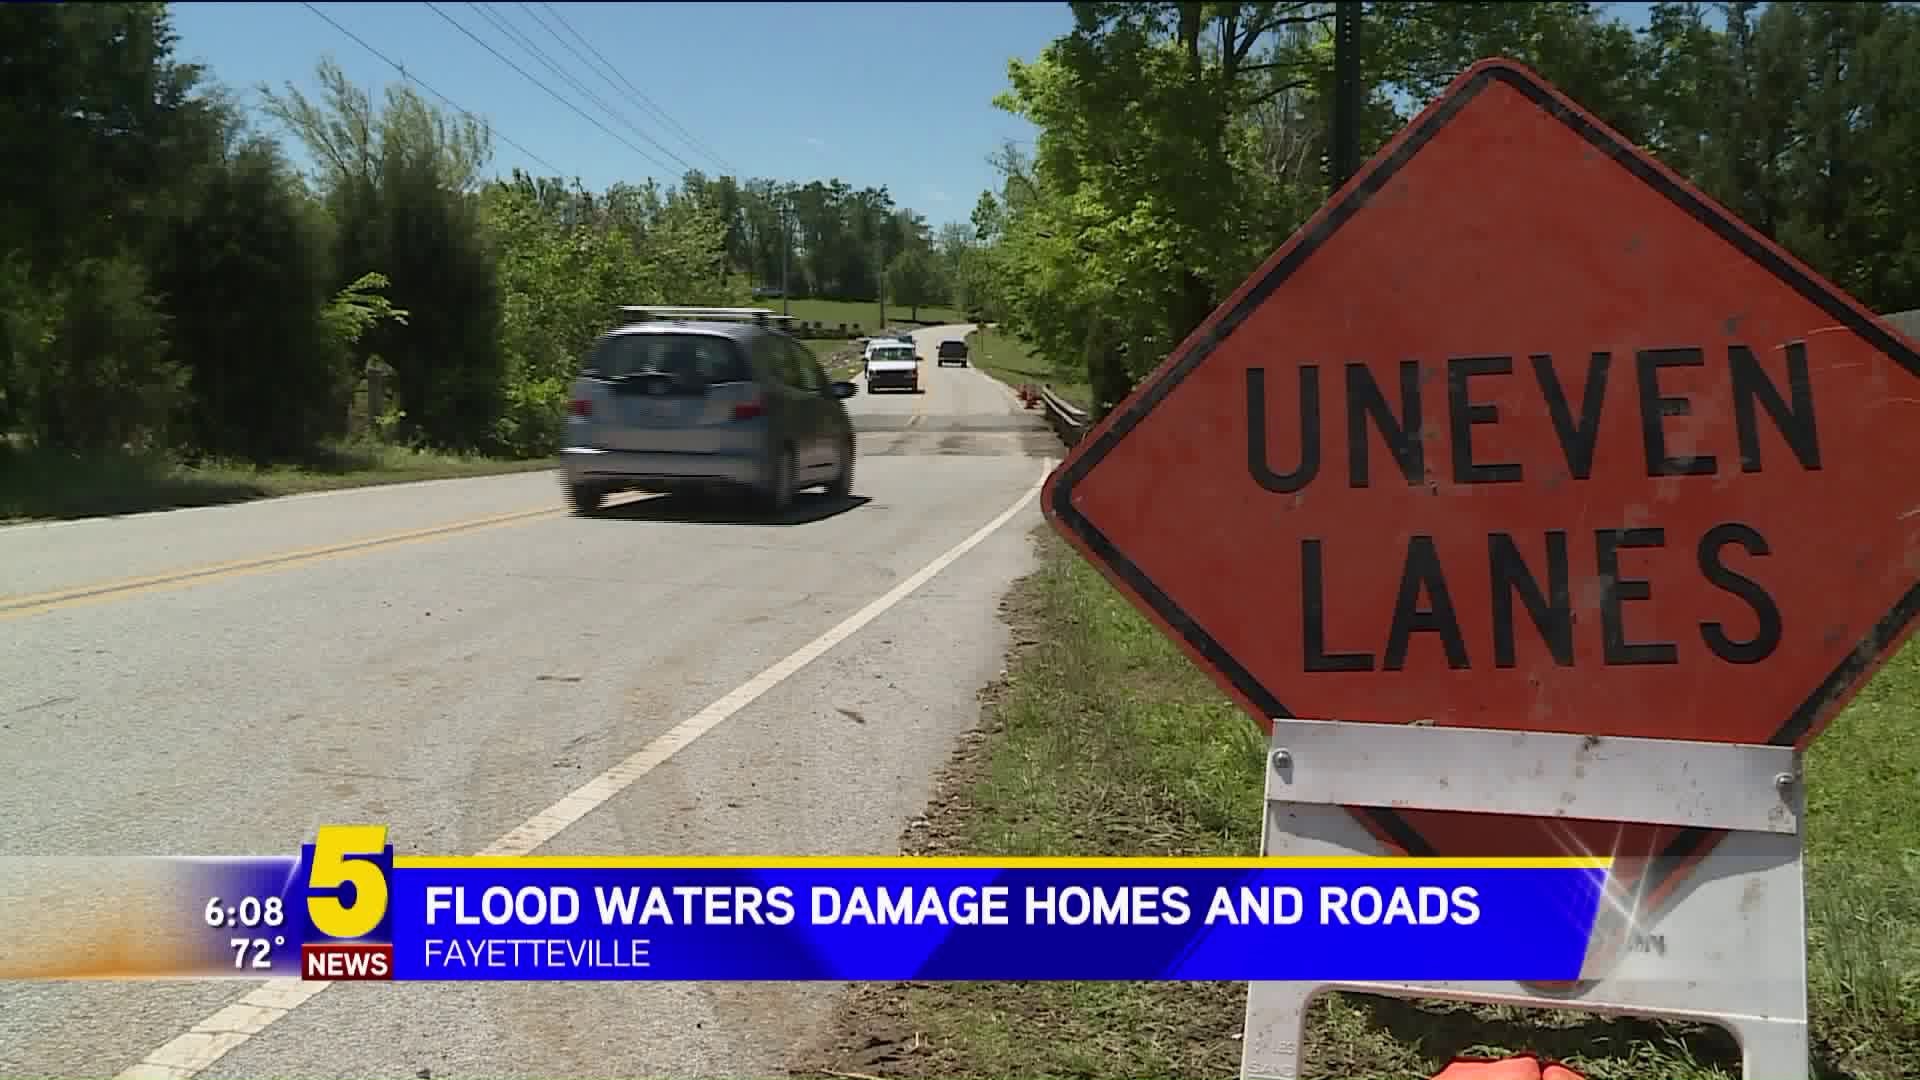 Flood Waters Damage Roads and Homes